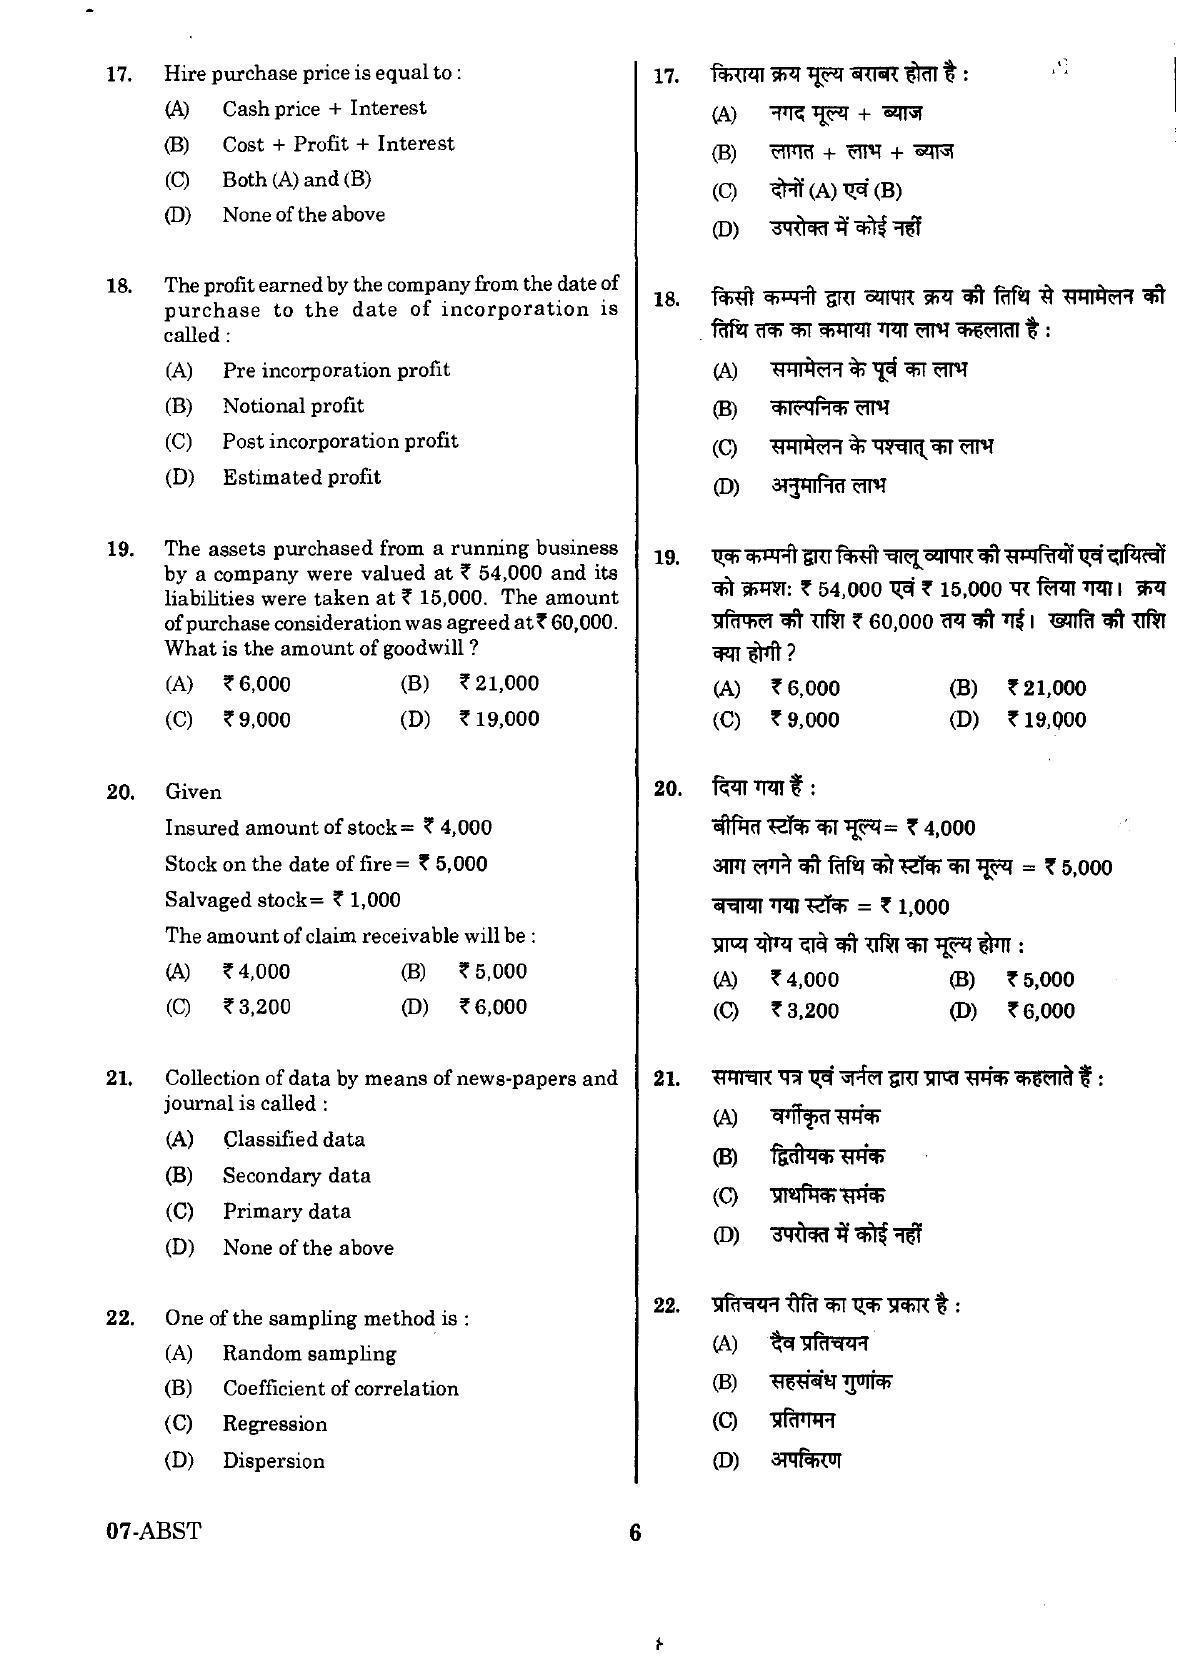 URATPG ABST Sample Question Paper 2018 - Page 5